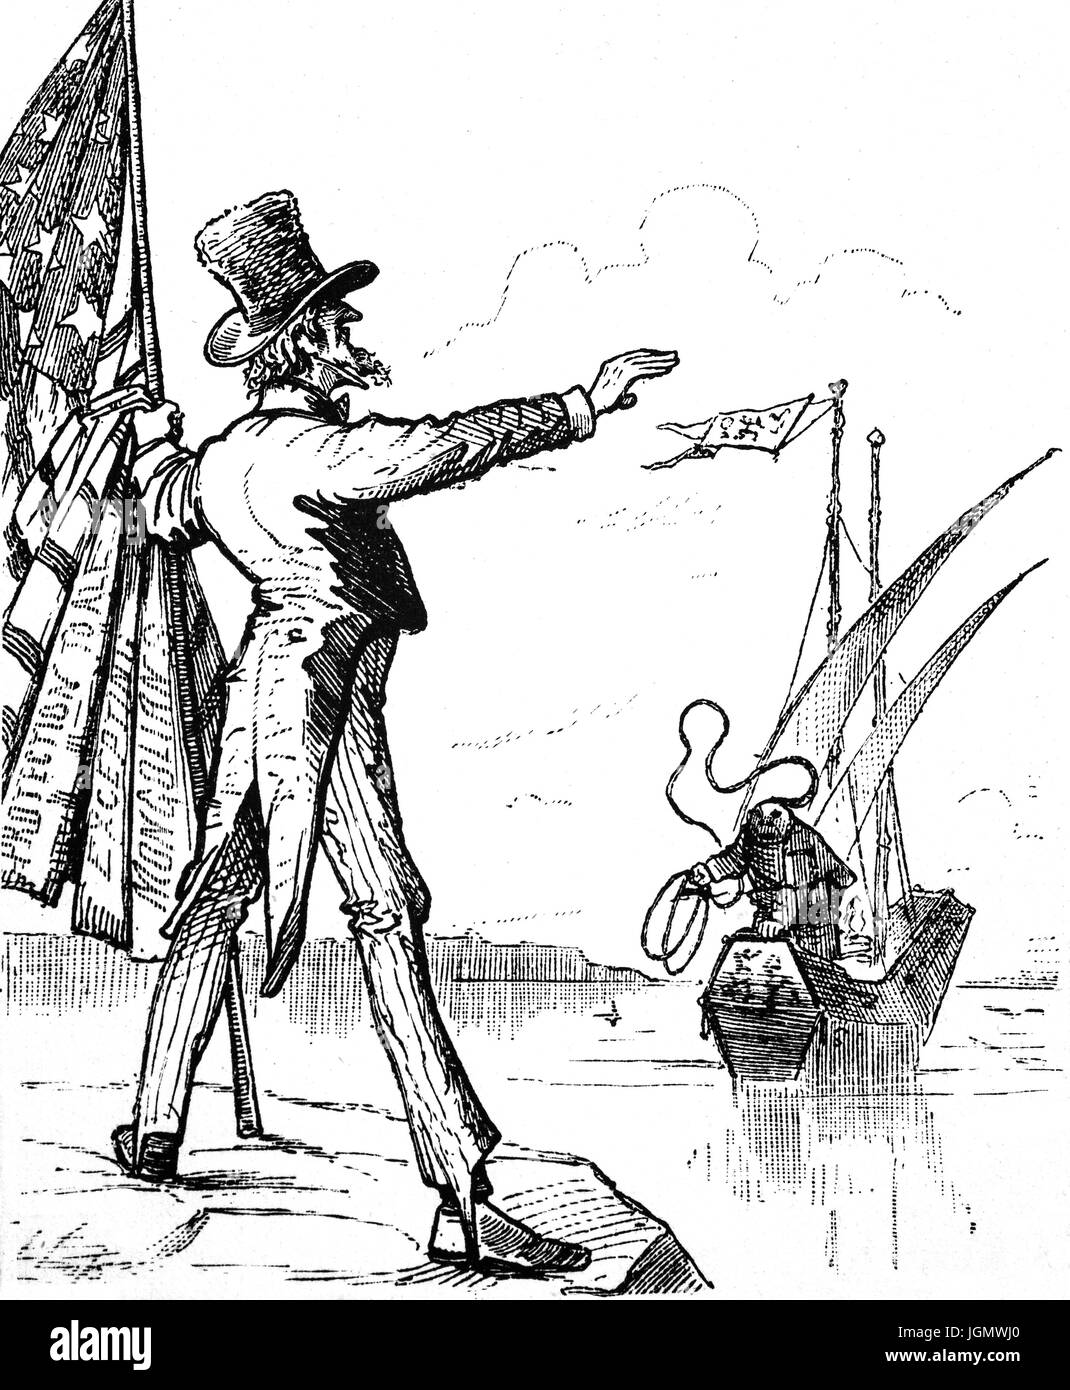 1879: A late 19th century political cartoon of Uncle Sam, keeping Chinese immigrants at bay: 'Keep off! You are so industrious and economical that our boys can't compete with you',  San Francisco, California, United States of America Stock Photo